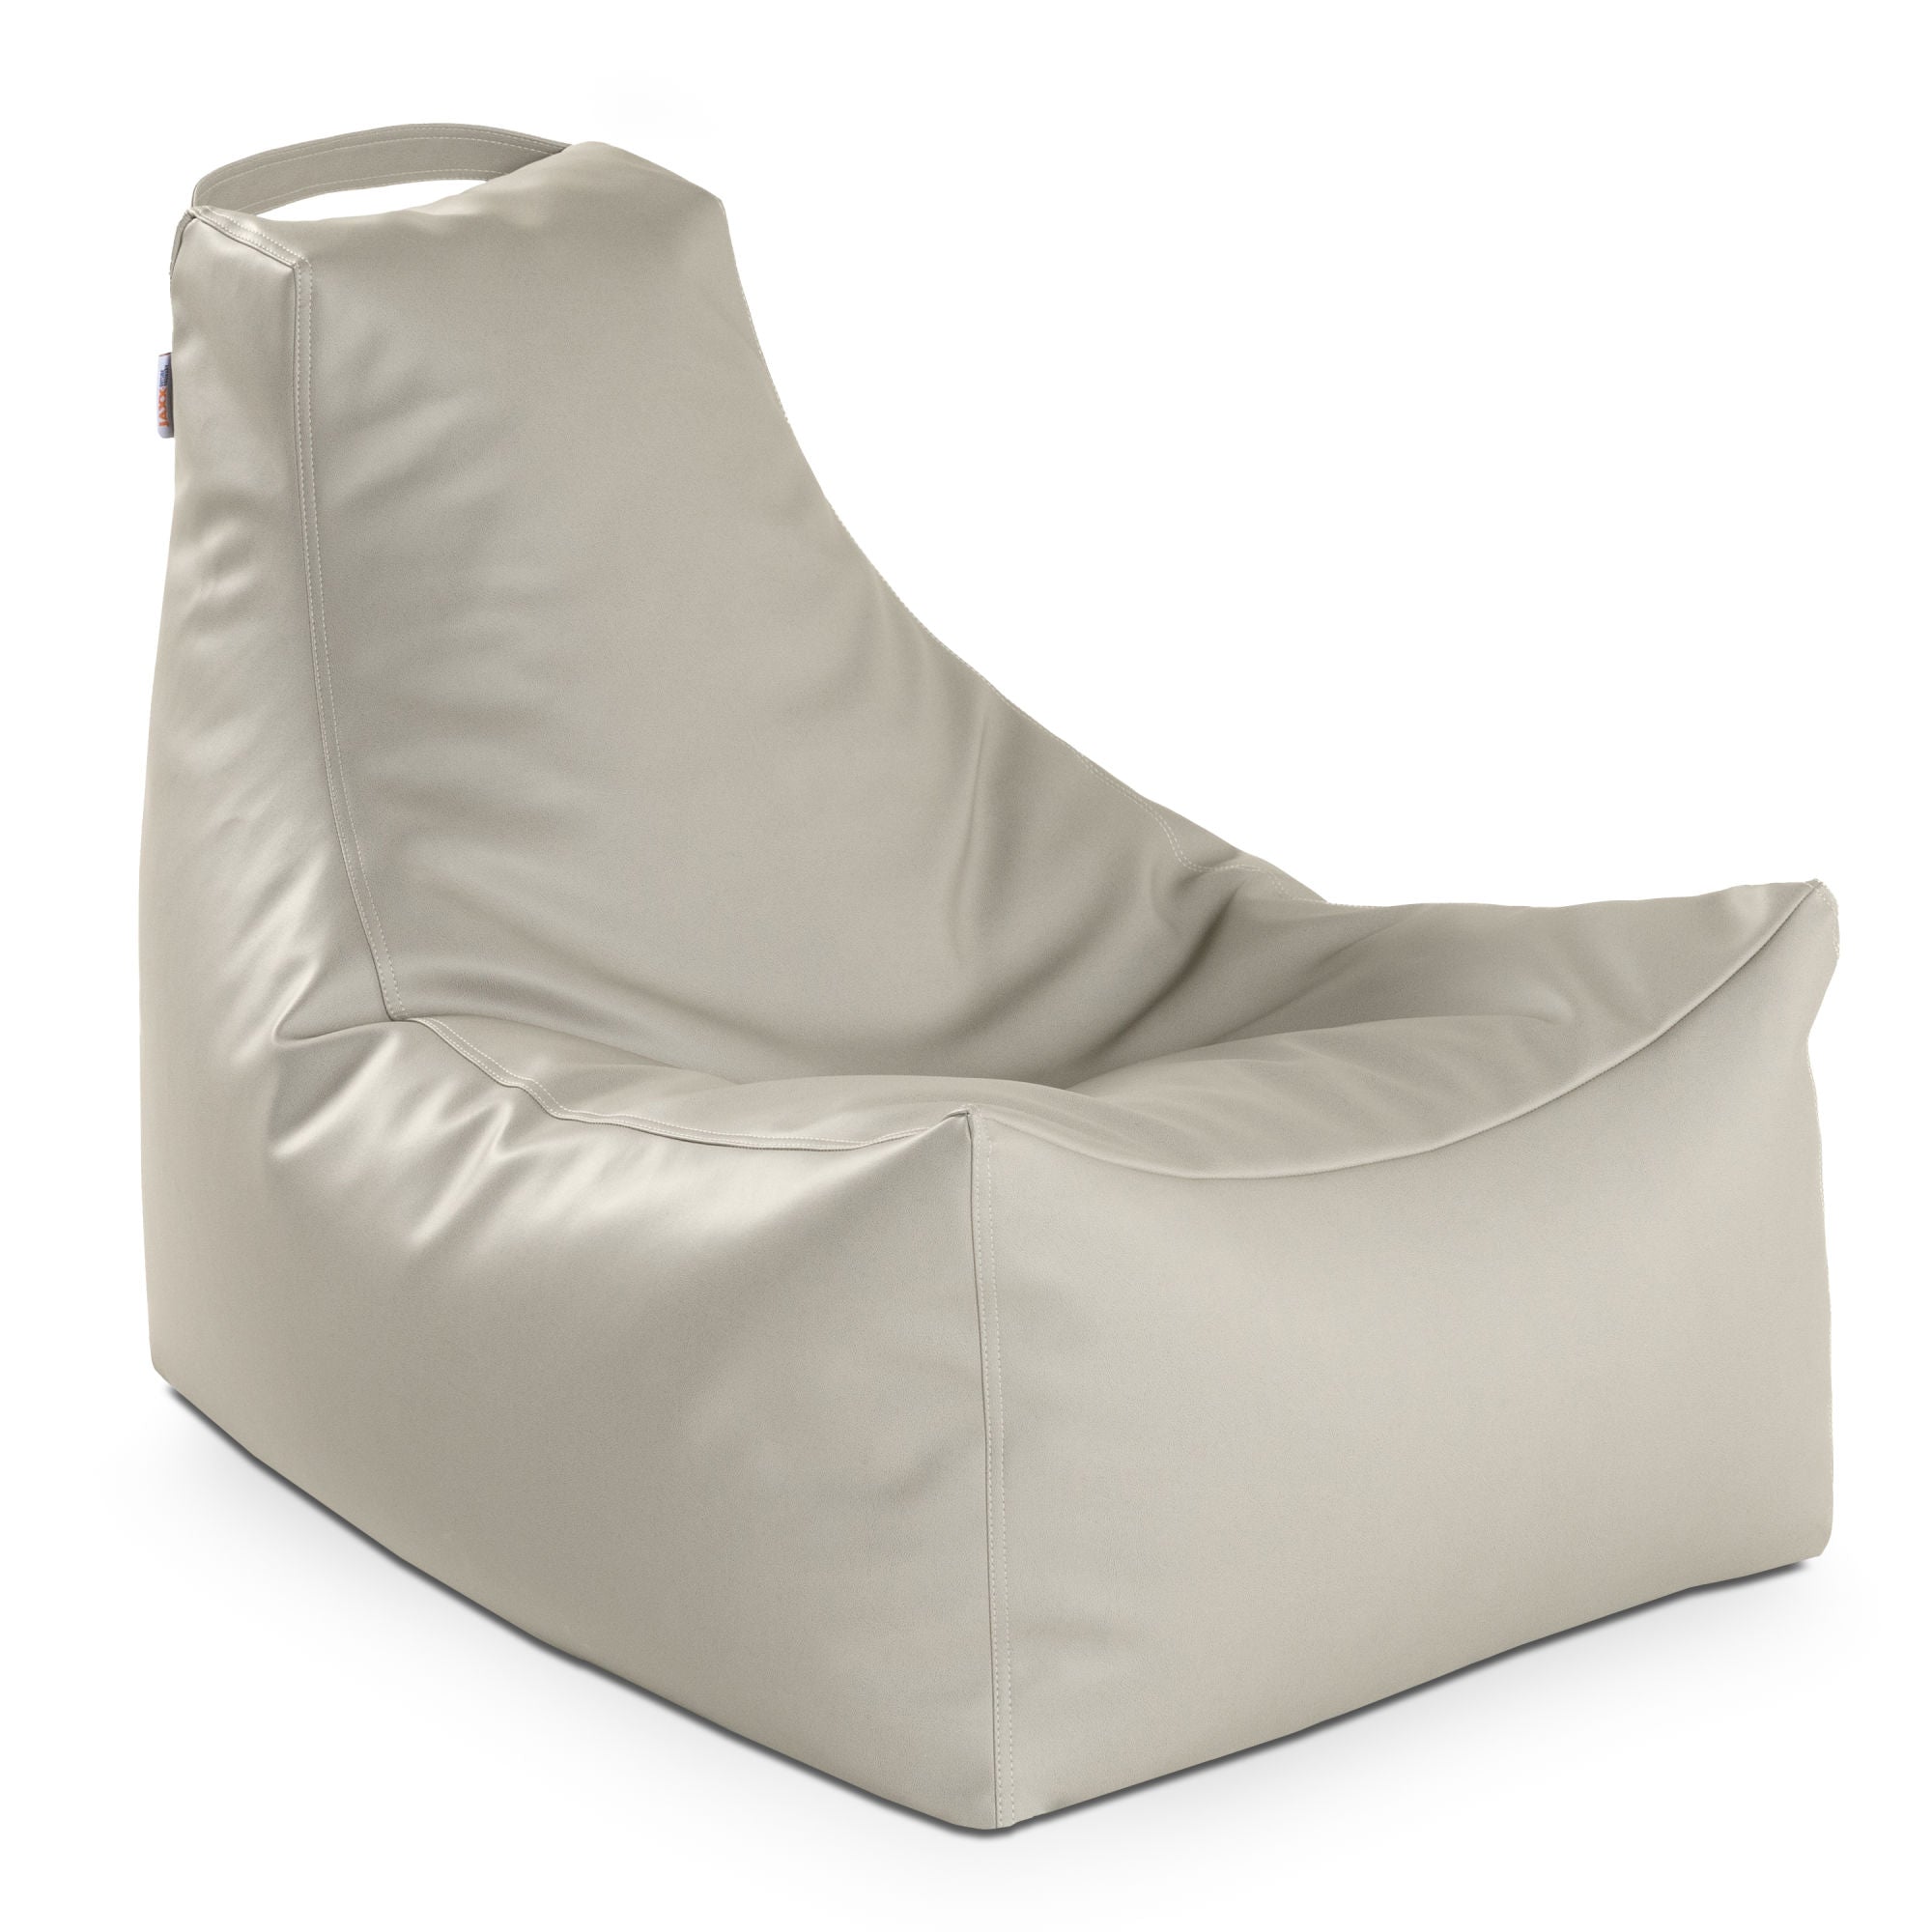 Jaxx Juniper Nautical Edition - Casual Bean Bag Seating for Boat, Yacht & Watersports